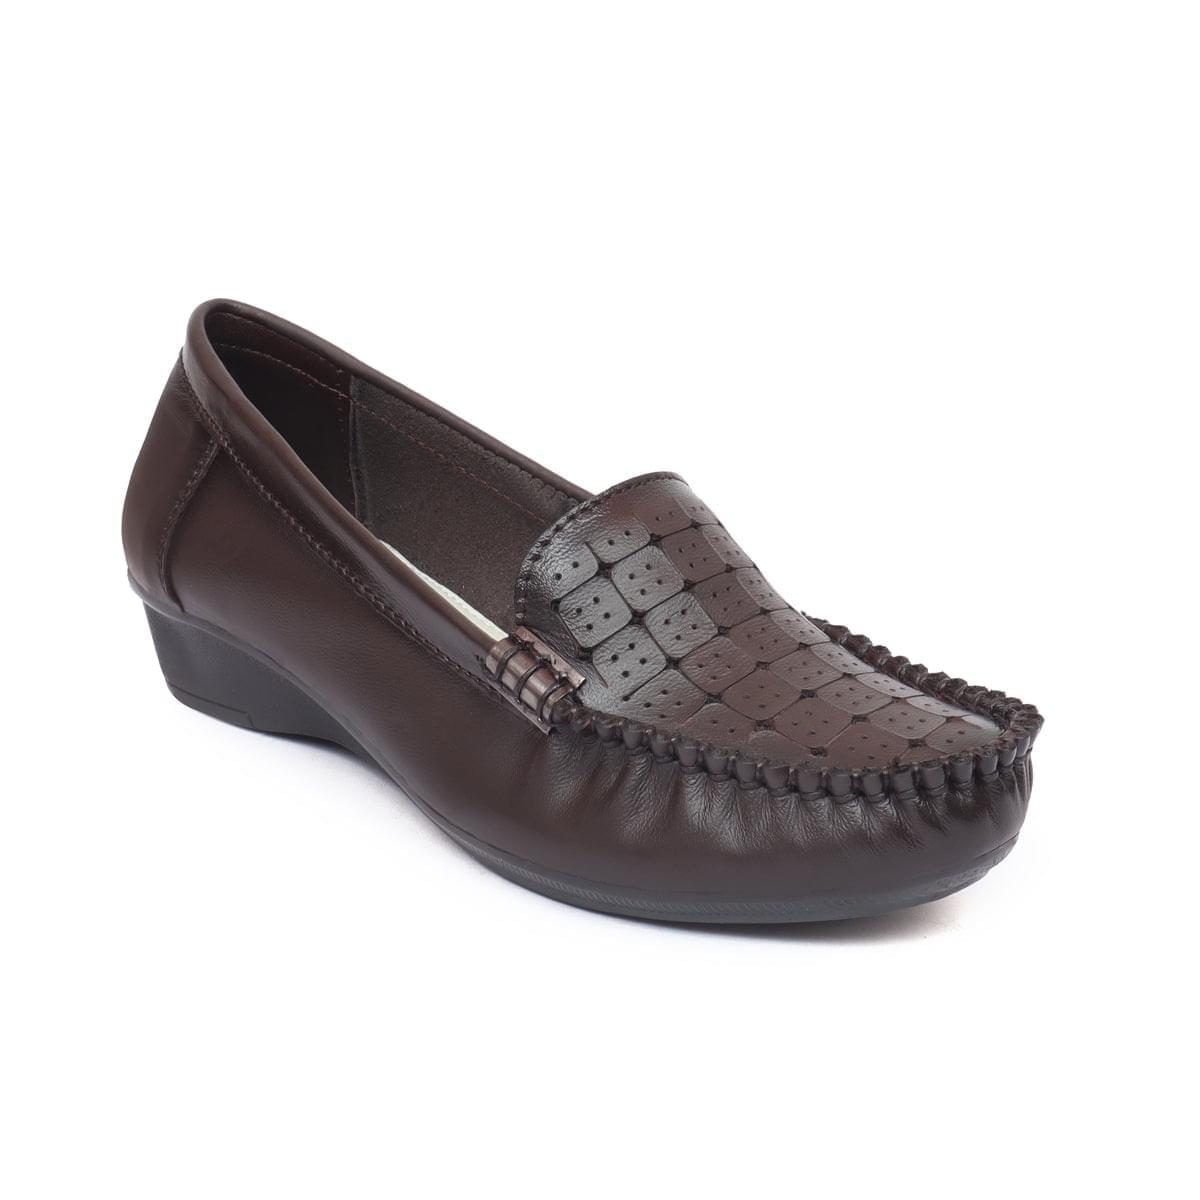 Slip on Shoes for Women Brown